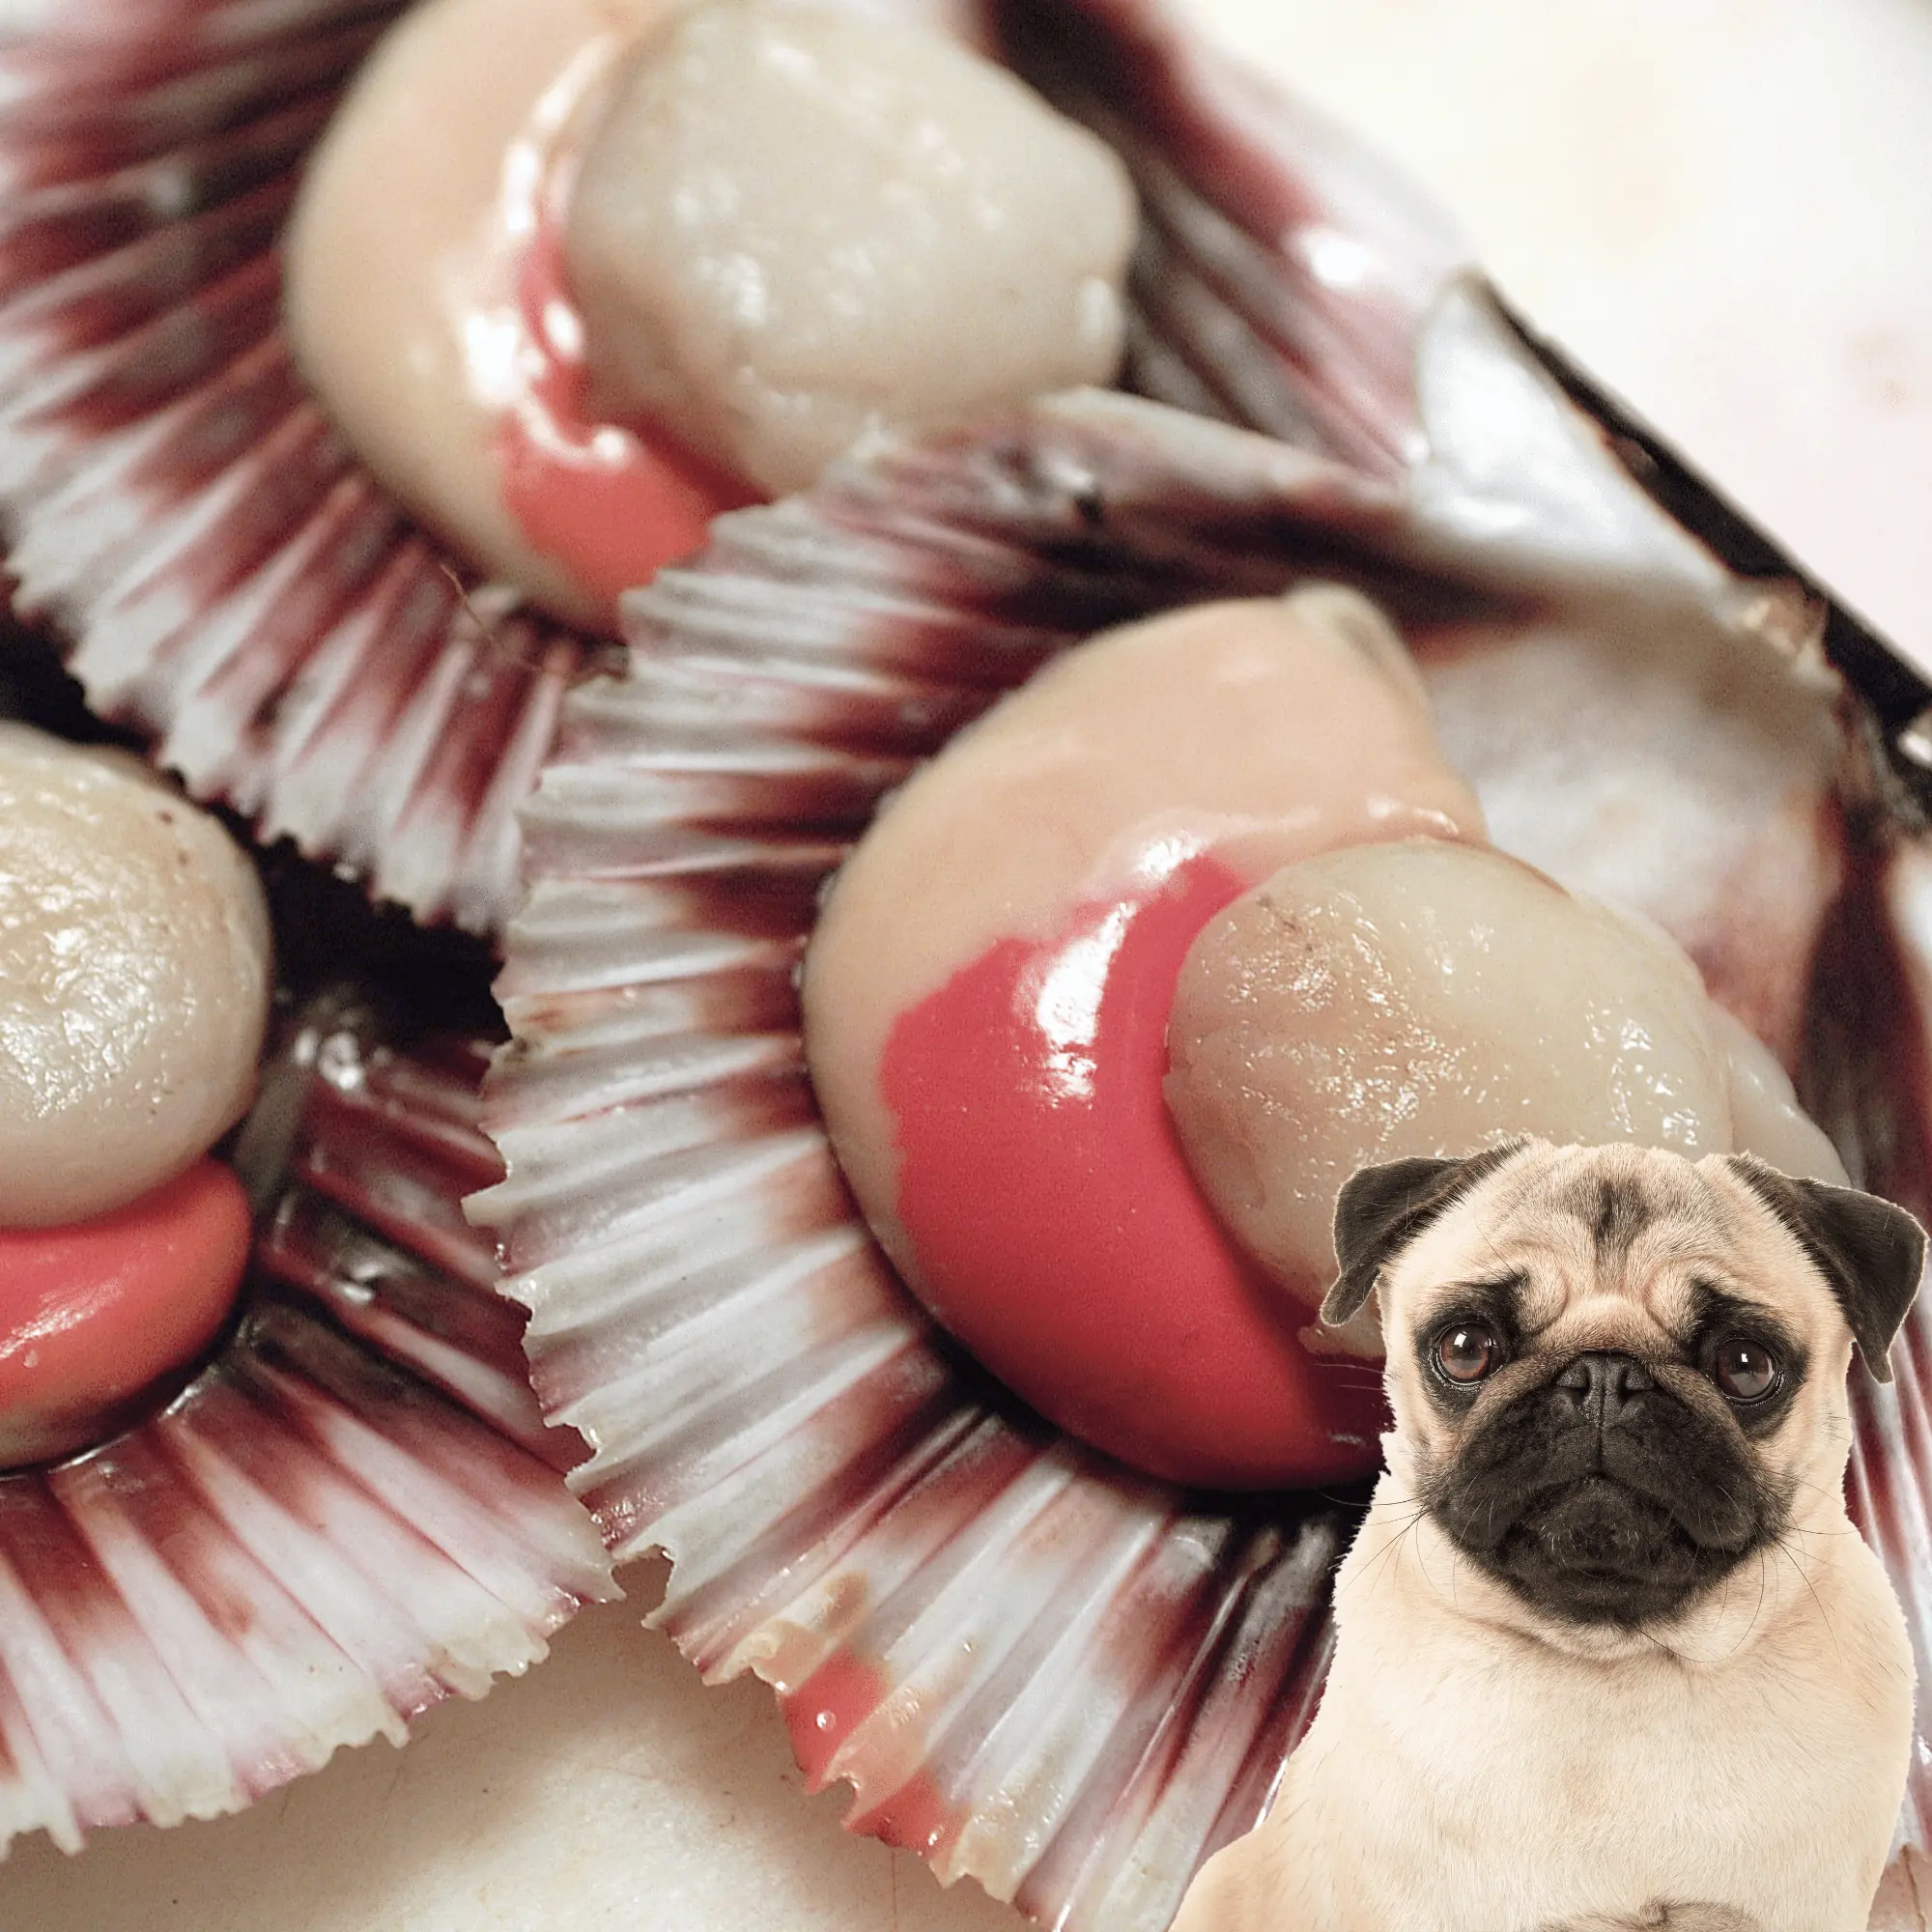 Are Scallops Safe Dogs to Consume